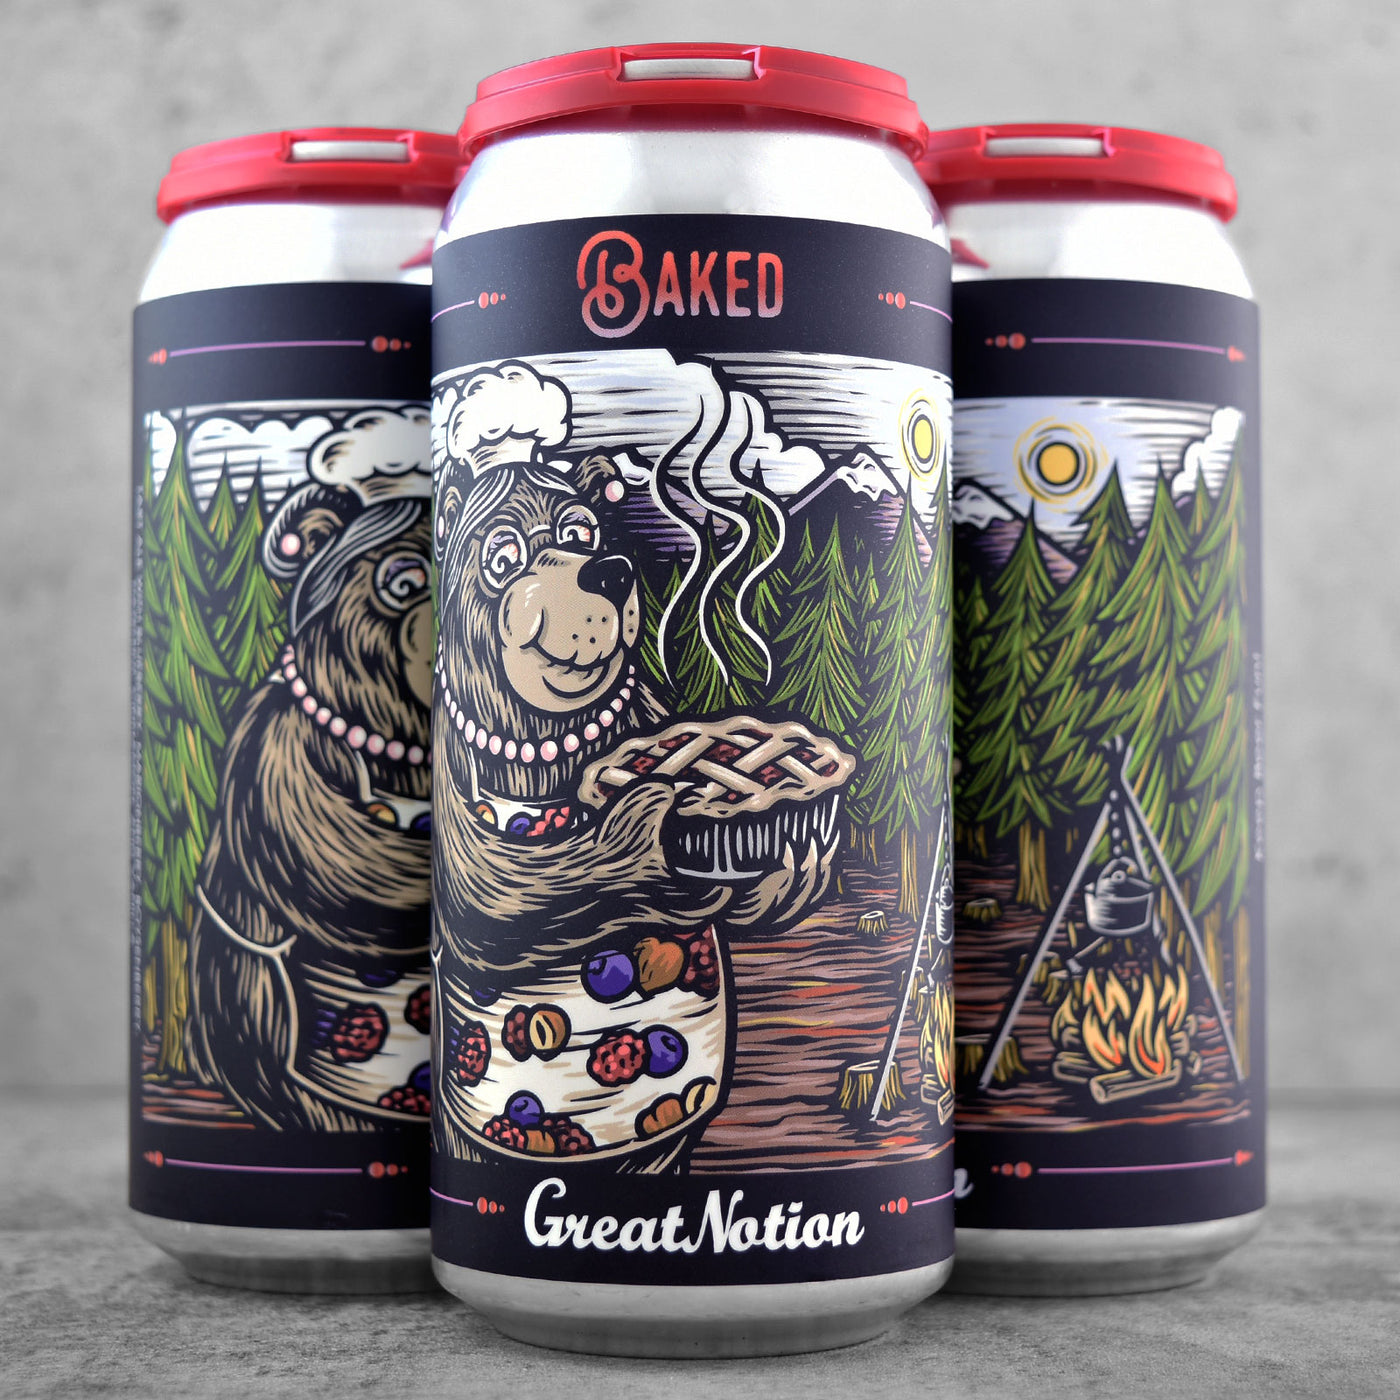 Great Notion Baked Berries